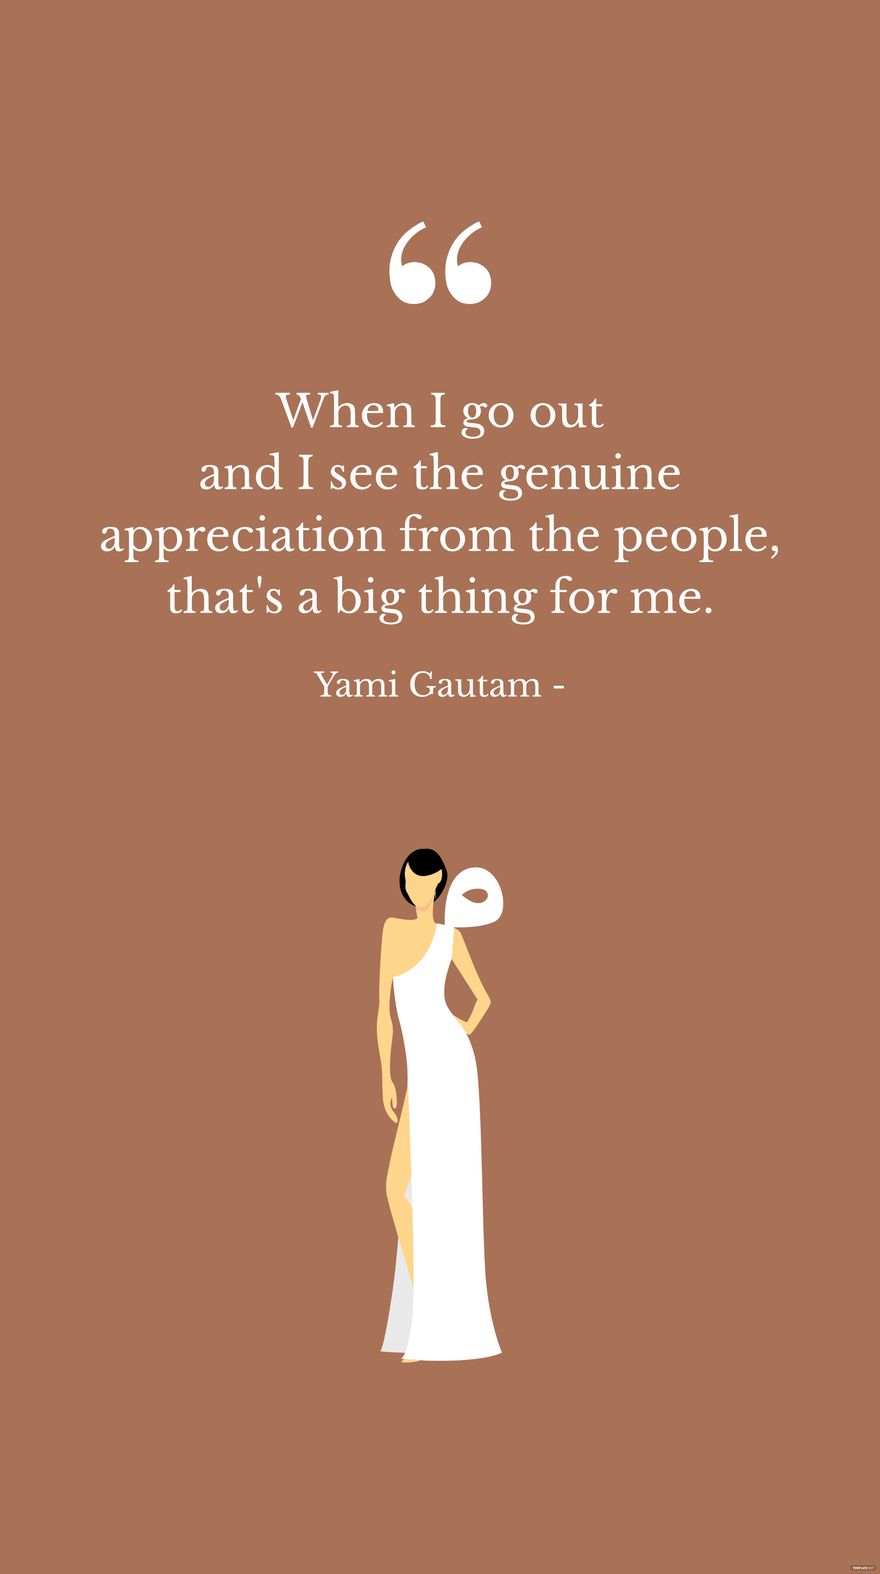 Yami Gautam - When I go out and I see the genuine appreciation from the people, that's a big thing for me. in JPG